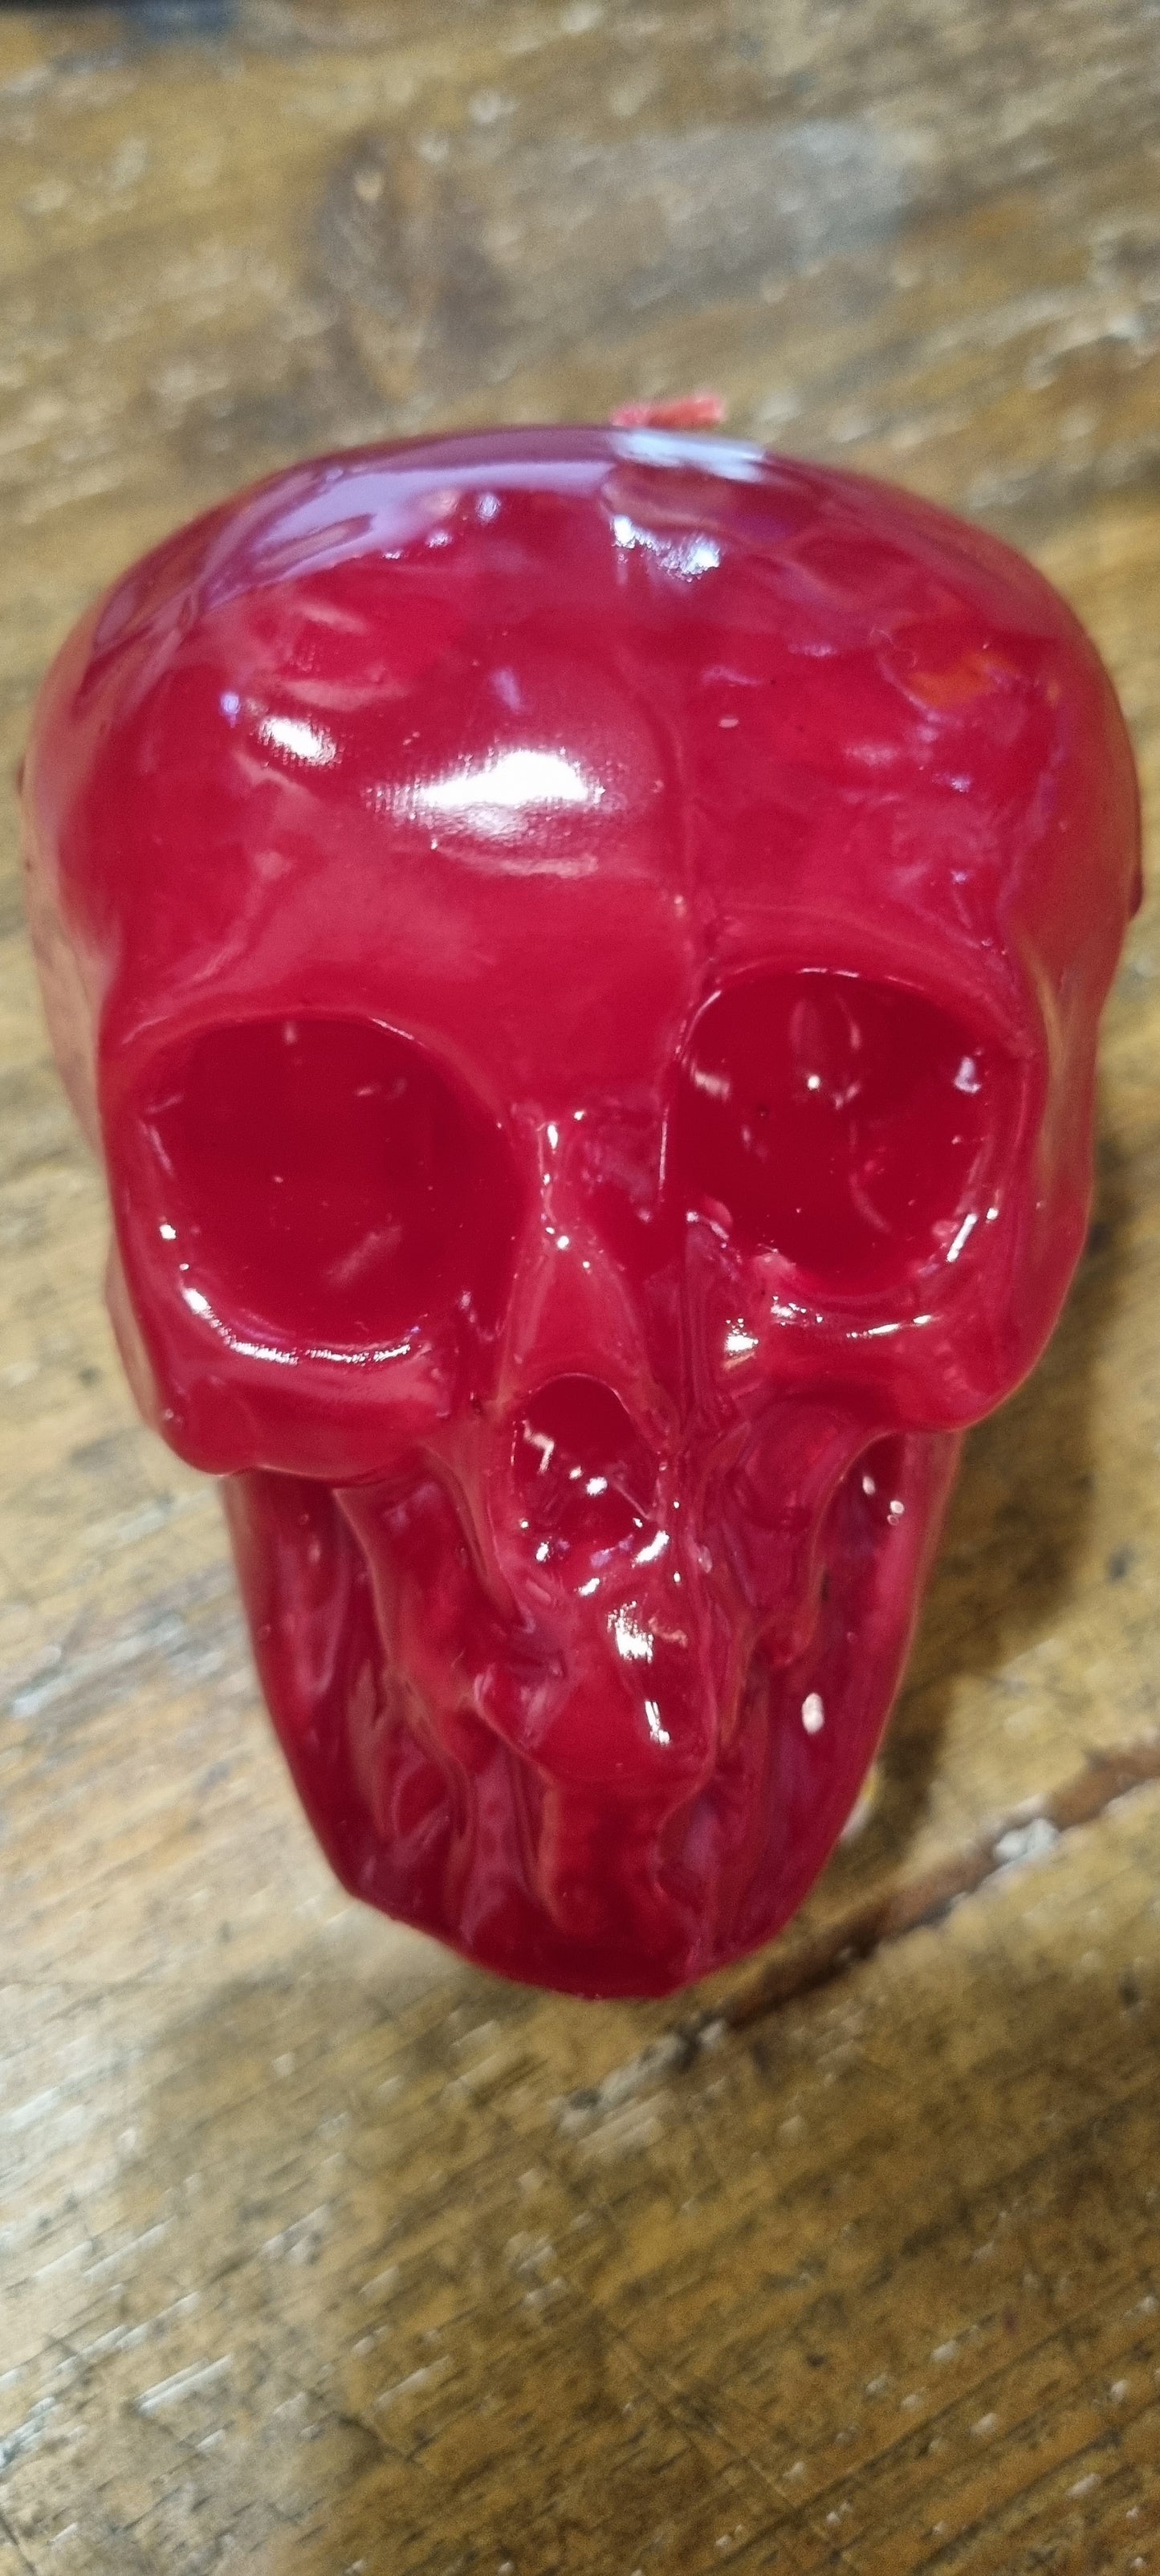 Nimbin Candles Skull Candle, Small Red Skull Or Large Red Skull